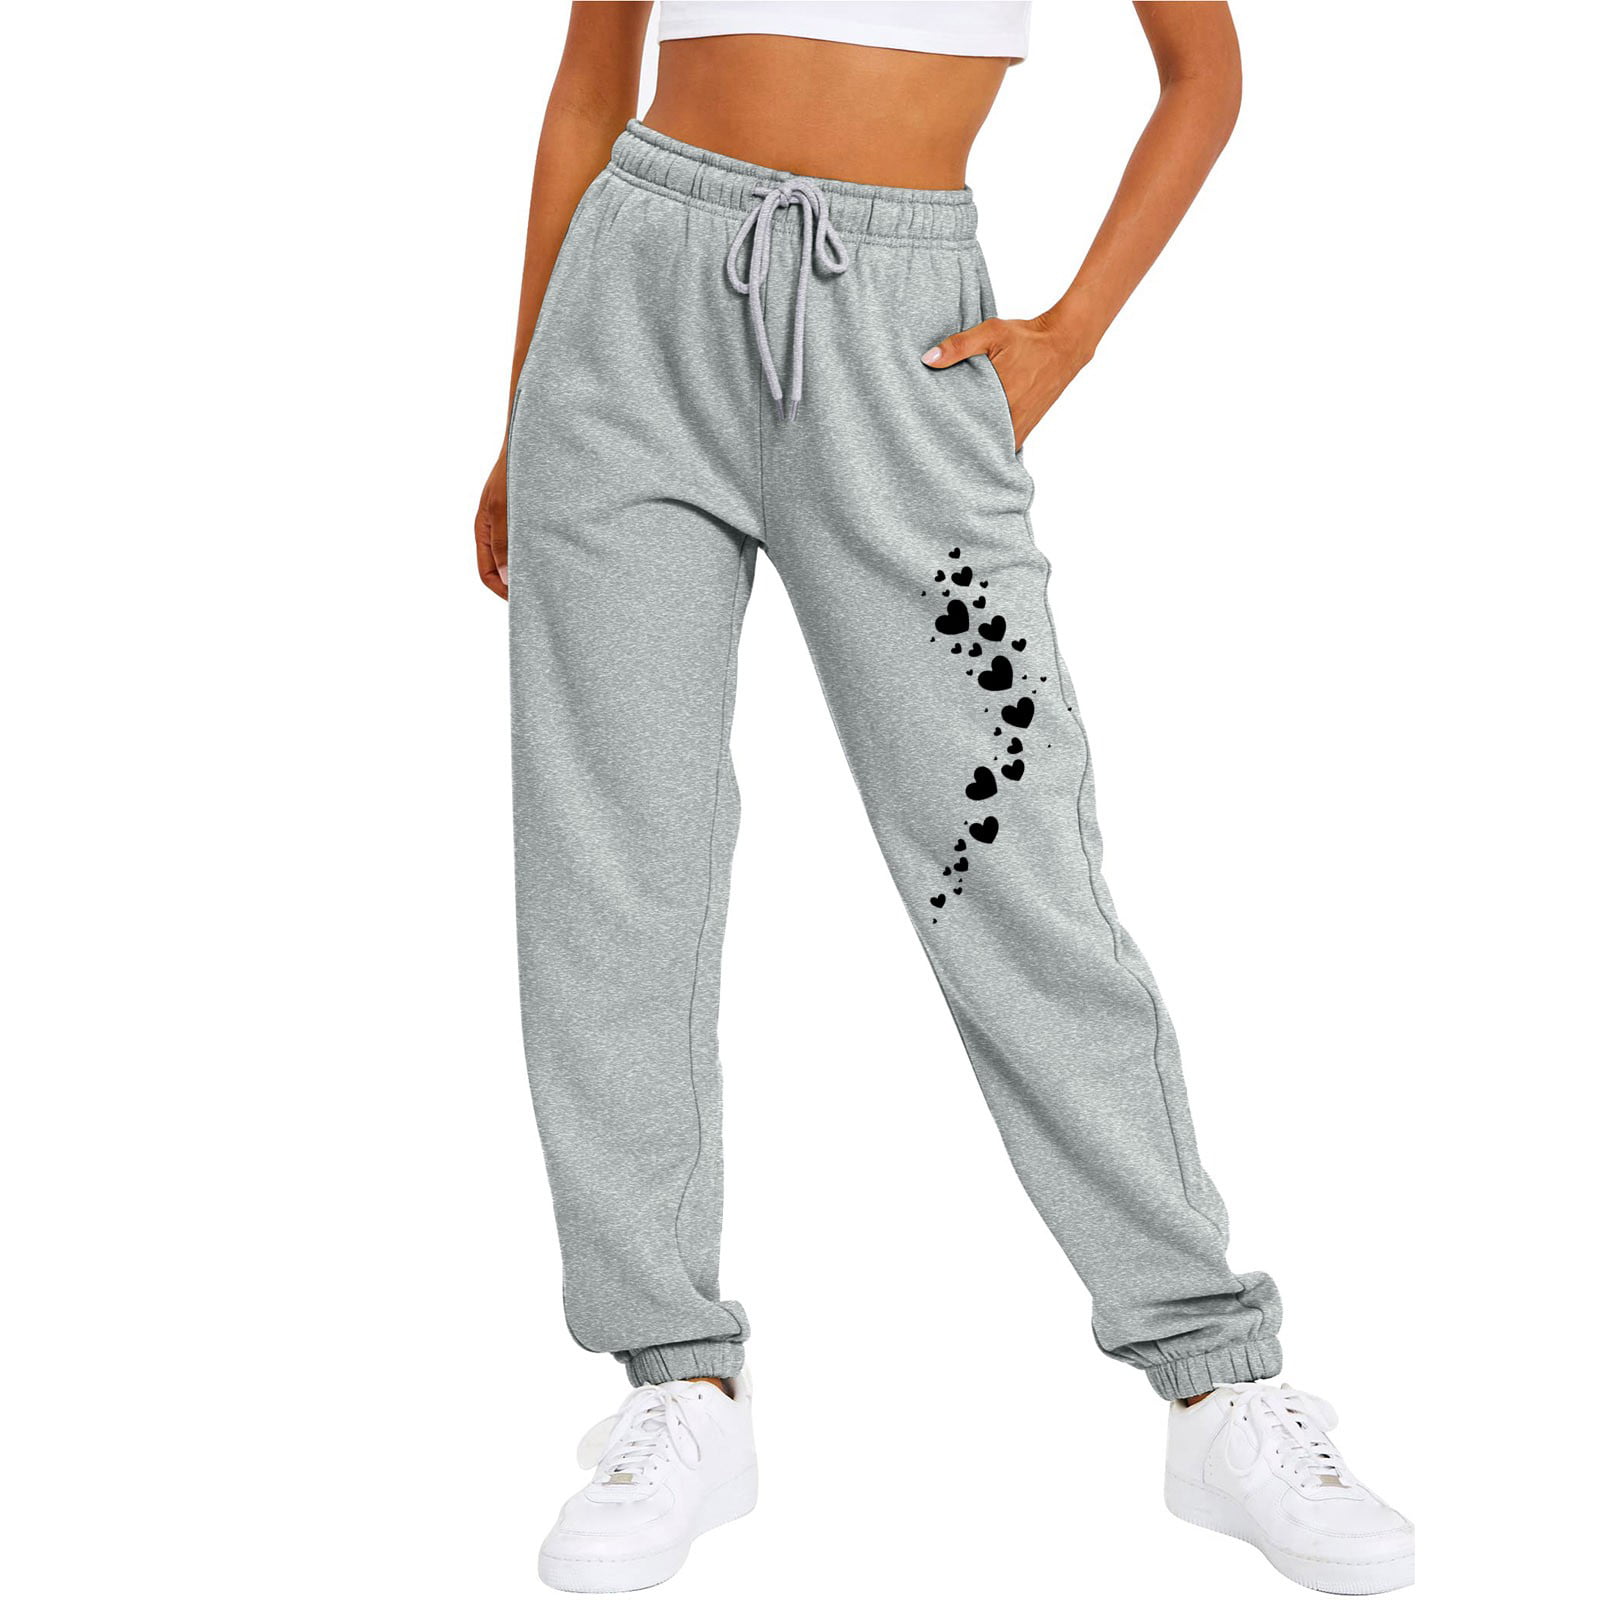 Womens Tapered Leg Casual Sweatpants Tracksuit Bottoms Harem Joggers Pants  with Pockets for Running Workout